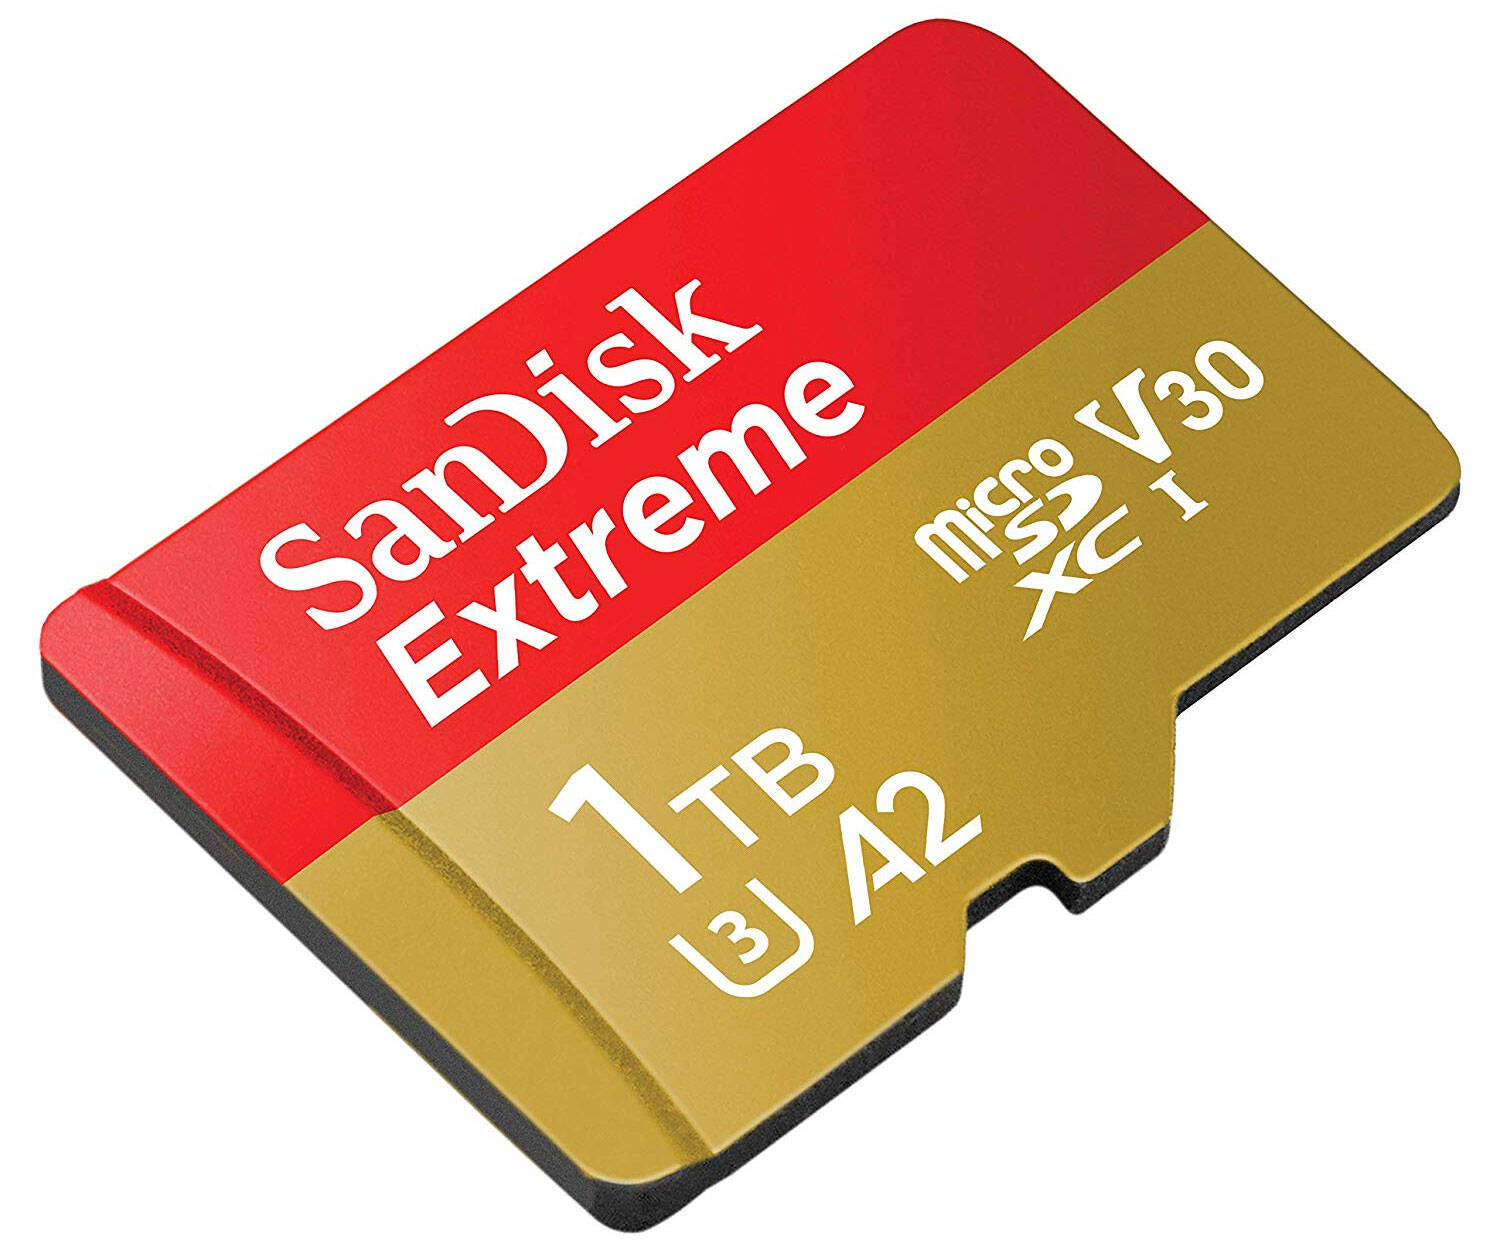 1TB MicroSD Card - //coolthings.us